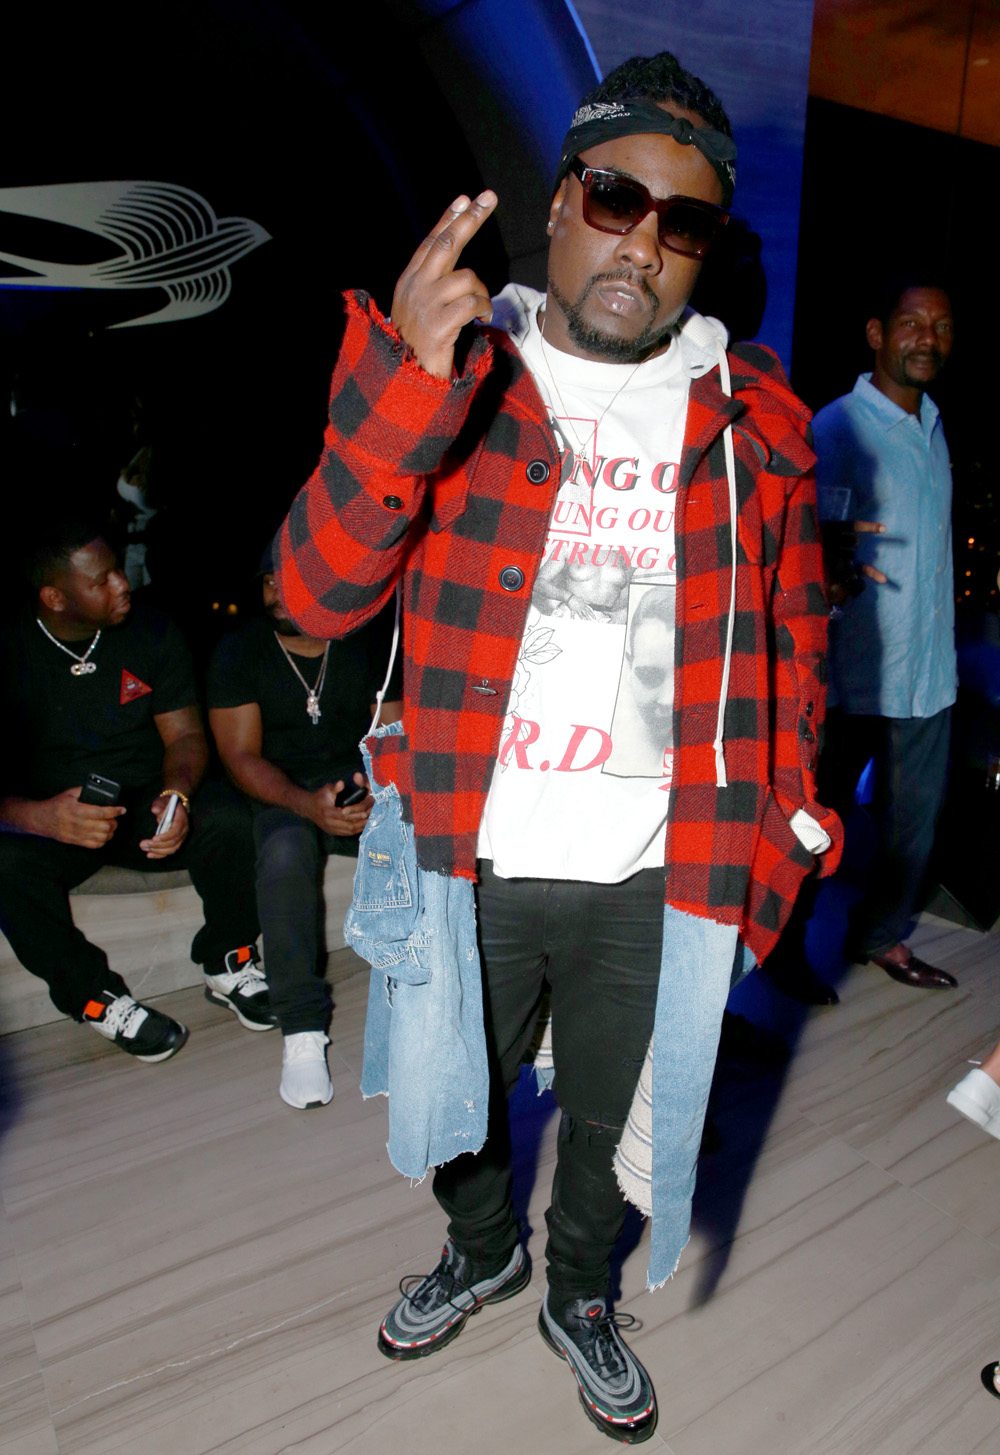 LOS ANGELES, CA - SEPTEMBER 28: Wale at H.O.M.E. by Martell hosted by Jhene Aiko on September 28, 2017 in Los Angeles, California. (Photo by Rich Fury/Getty Images for Martell)